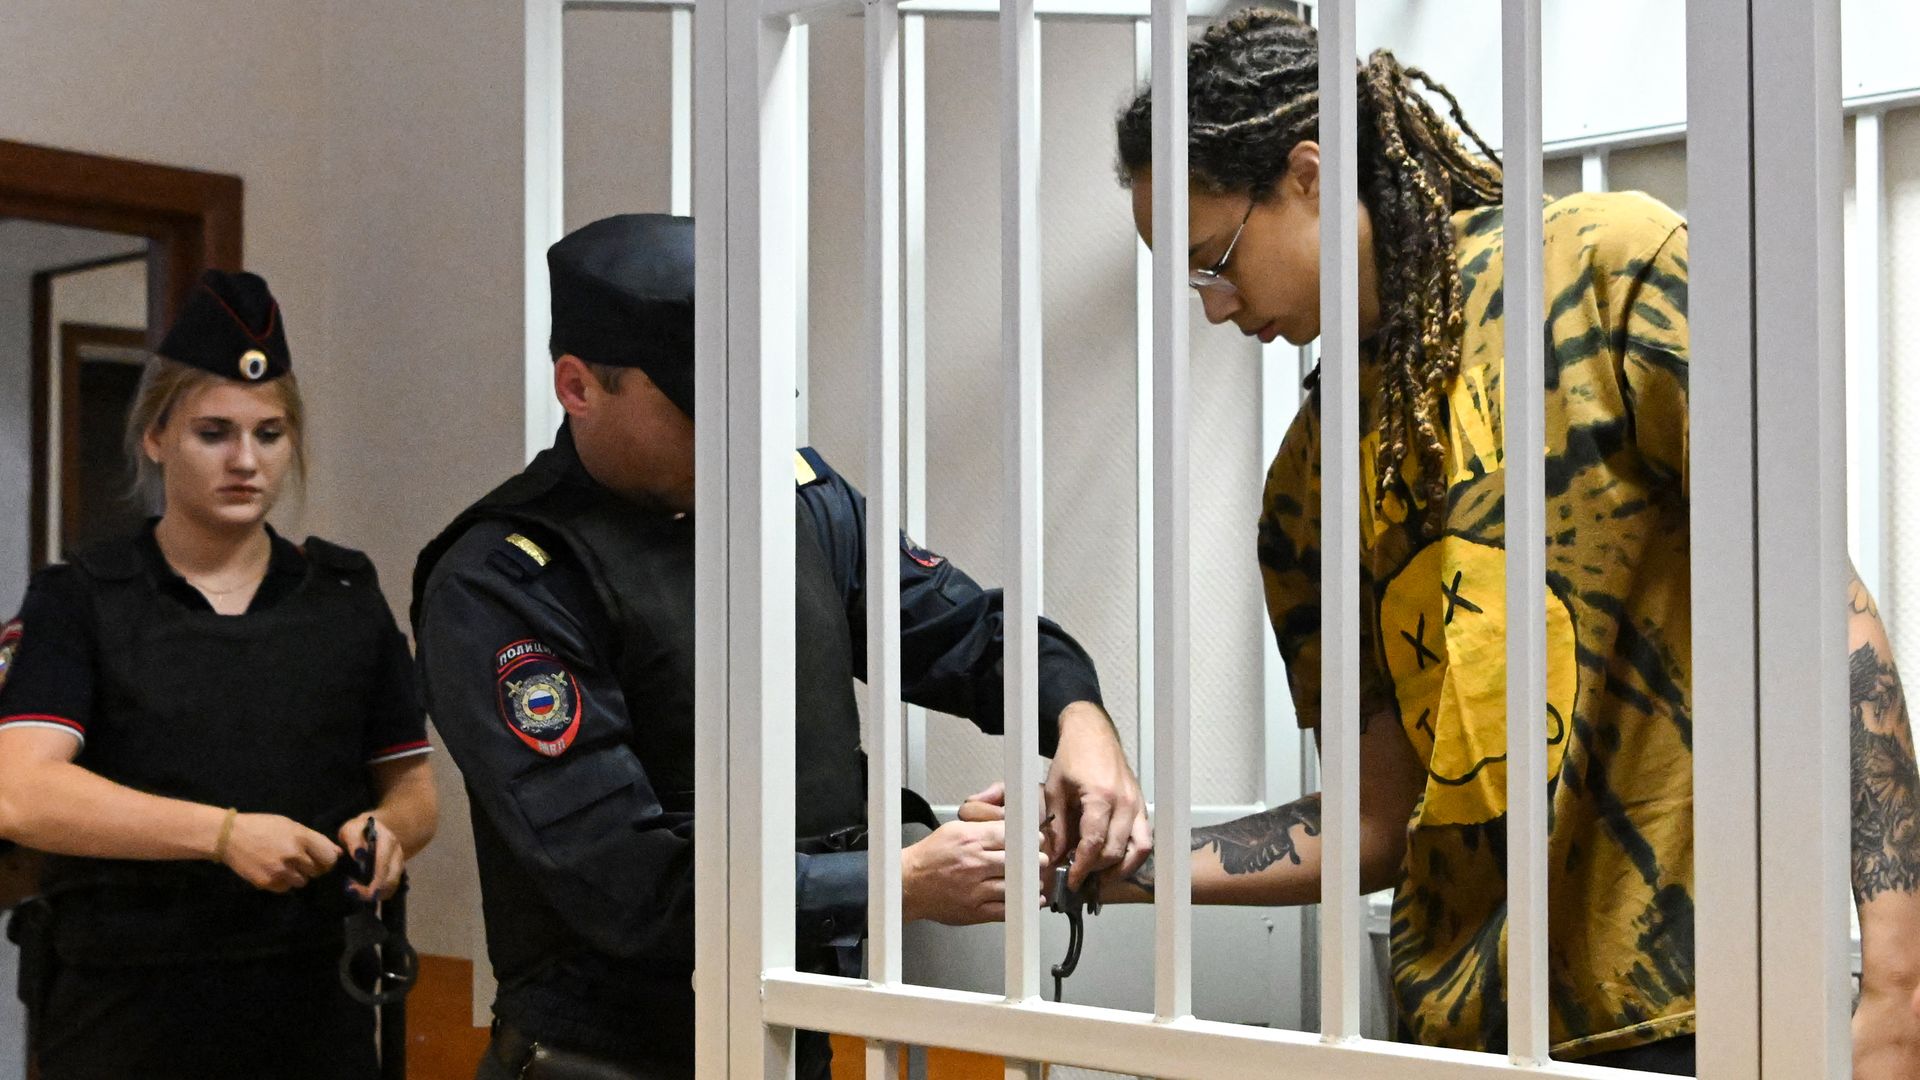 US WNBA basketball superstar Brittney Griner gets handcuffs taken off before a hearing at the Khimki Court in the town of Khimki.